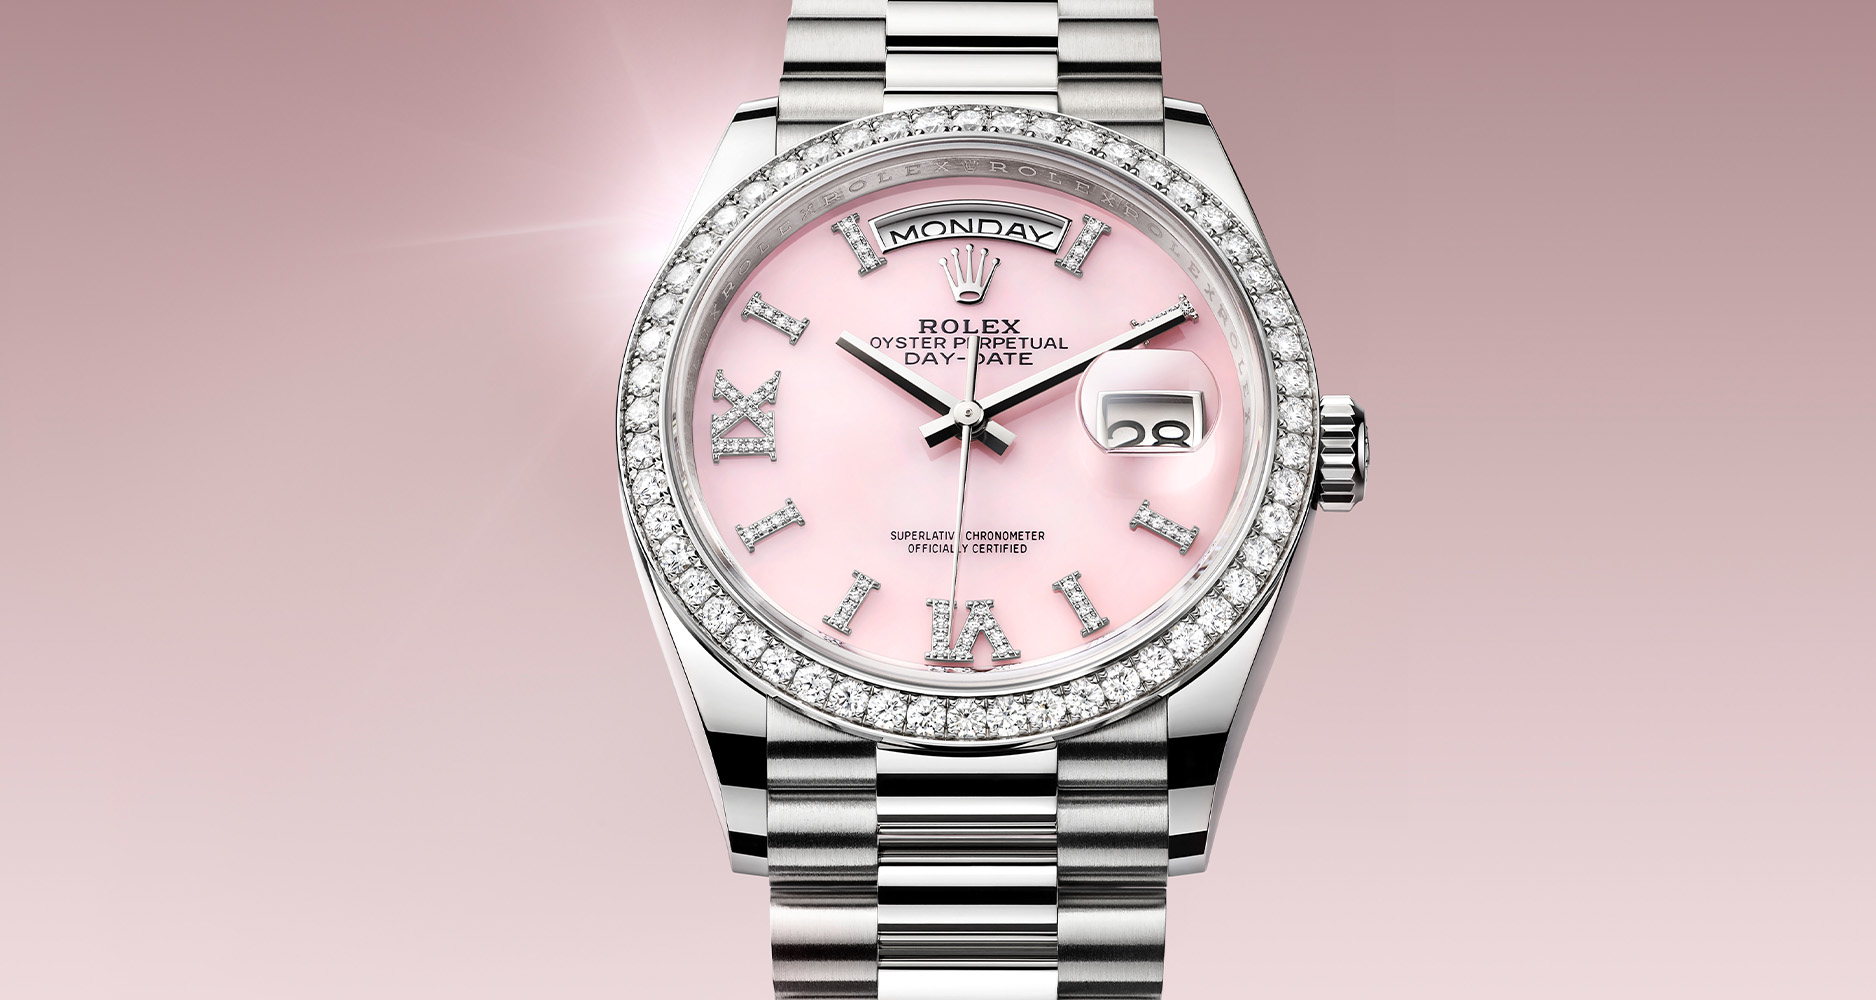 Rolex's Oyster Perpetual Day-Date 36 with diamond-set Roman numerals and pink opal dial is available with a white gold or platinum case and bracelet.